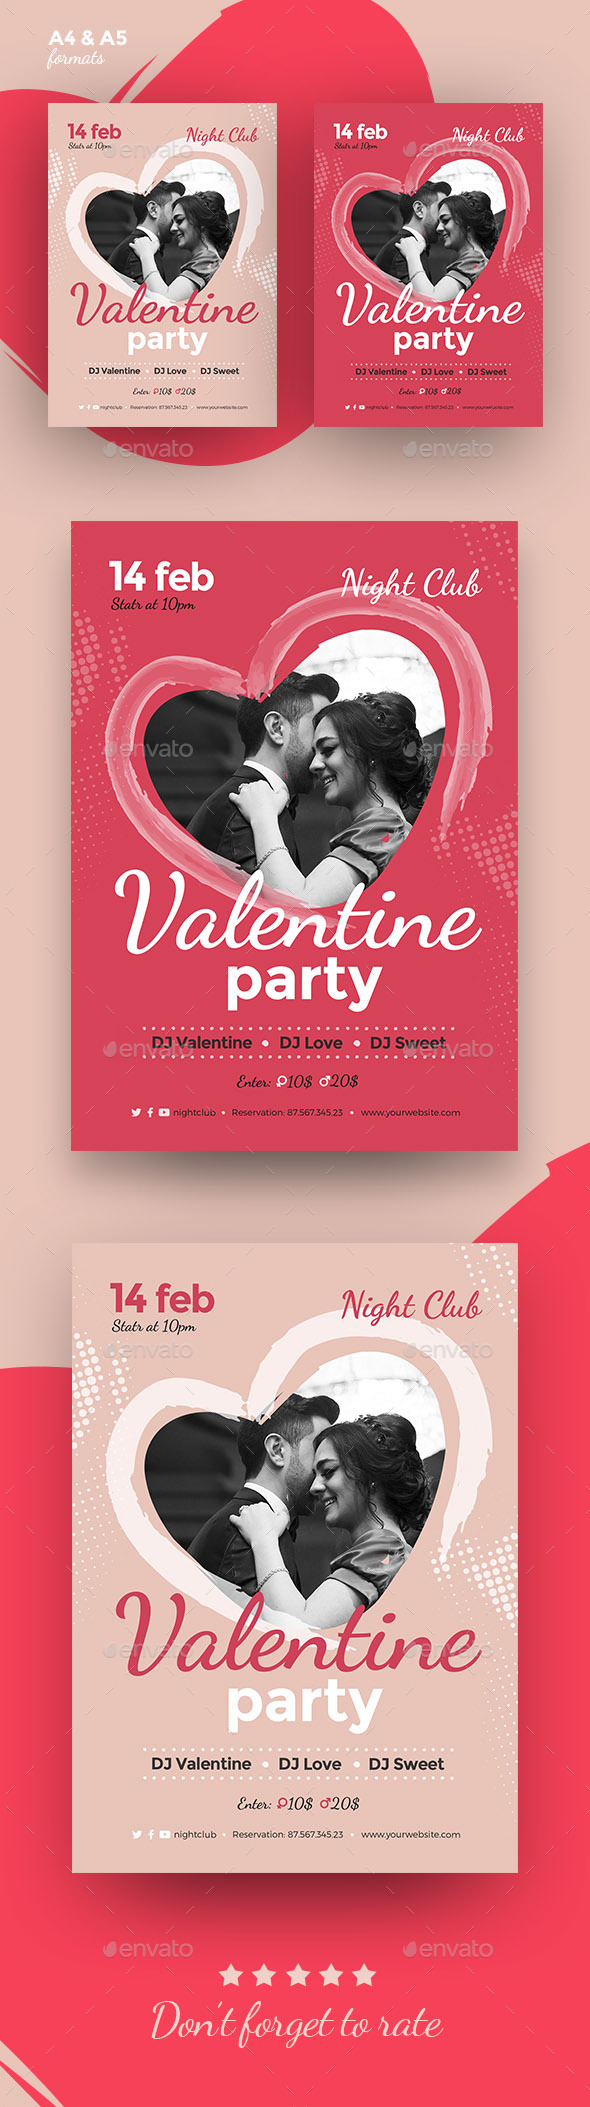 Valentines Day Flyer/Poster Event